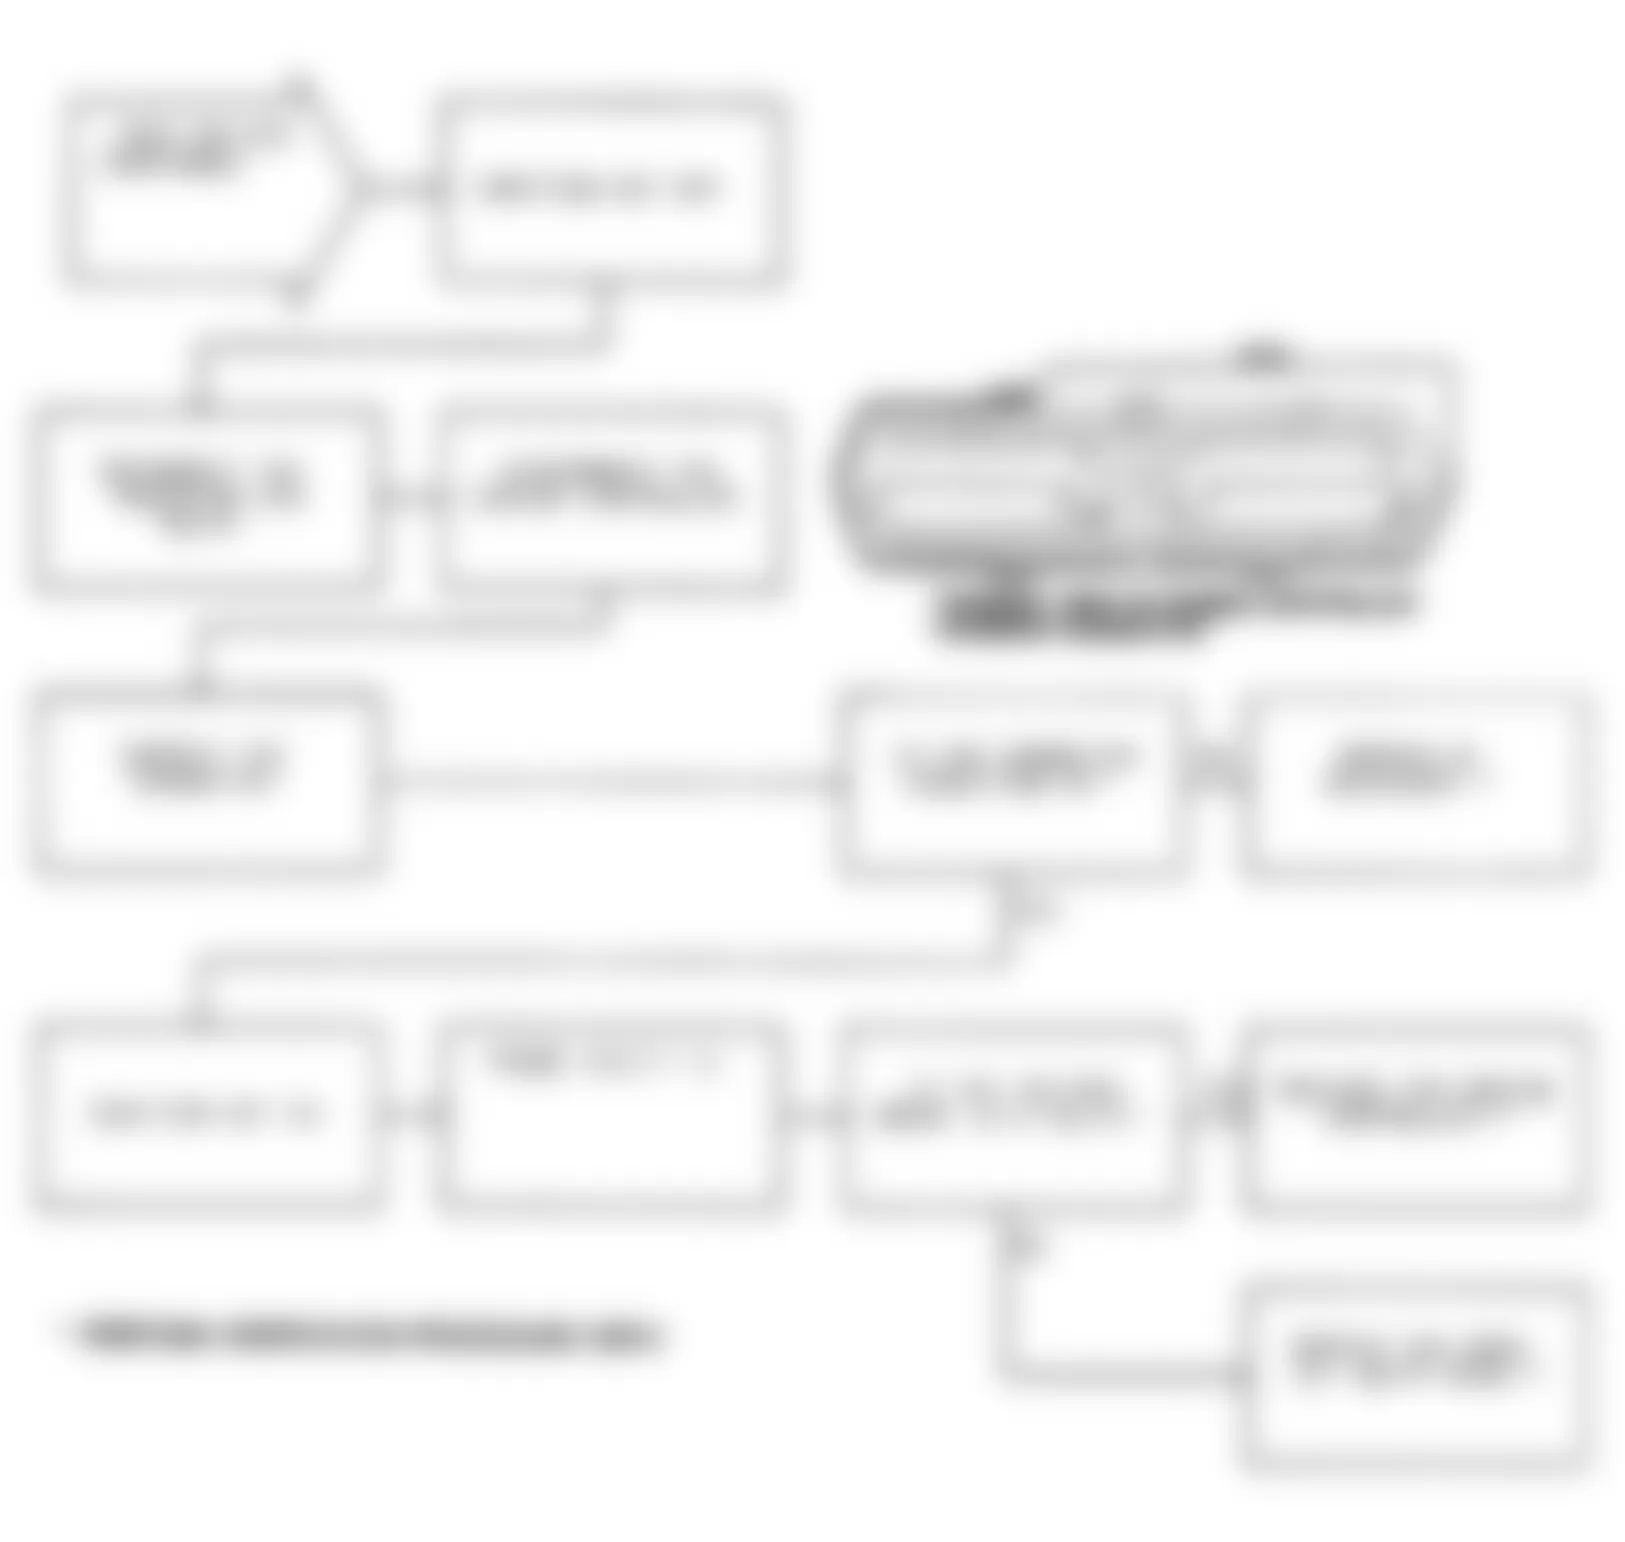 Chrysler Imperial 1991 - Component Locations -  Test DR-27A Code 35: Flowchart (2 of 2)